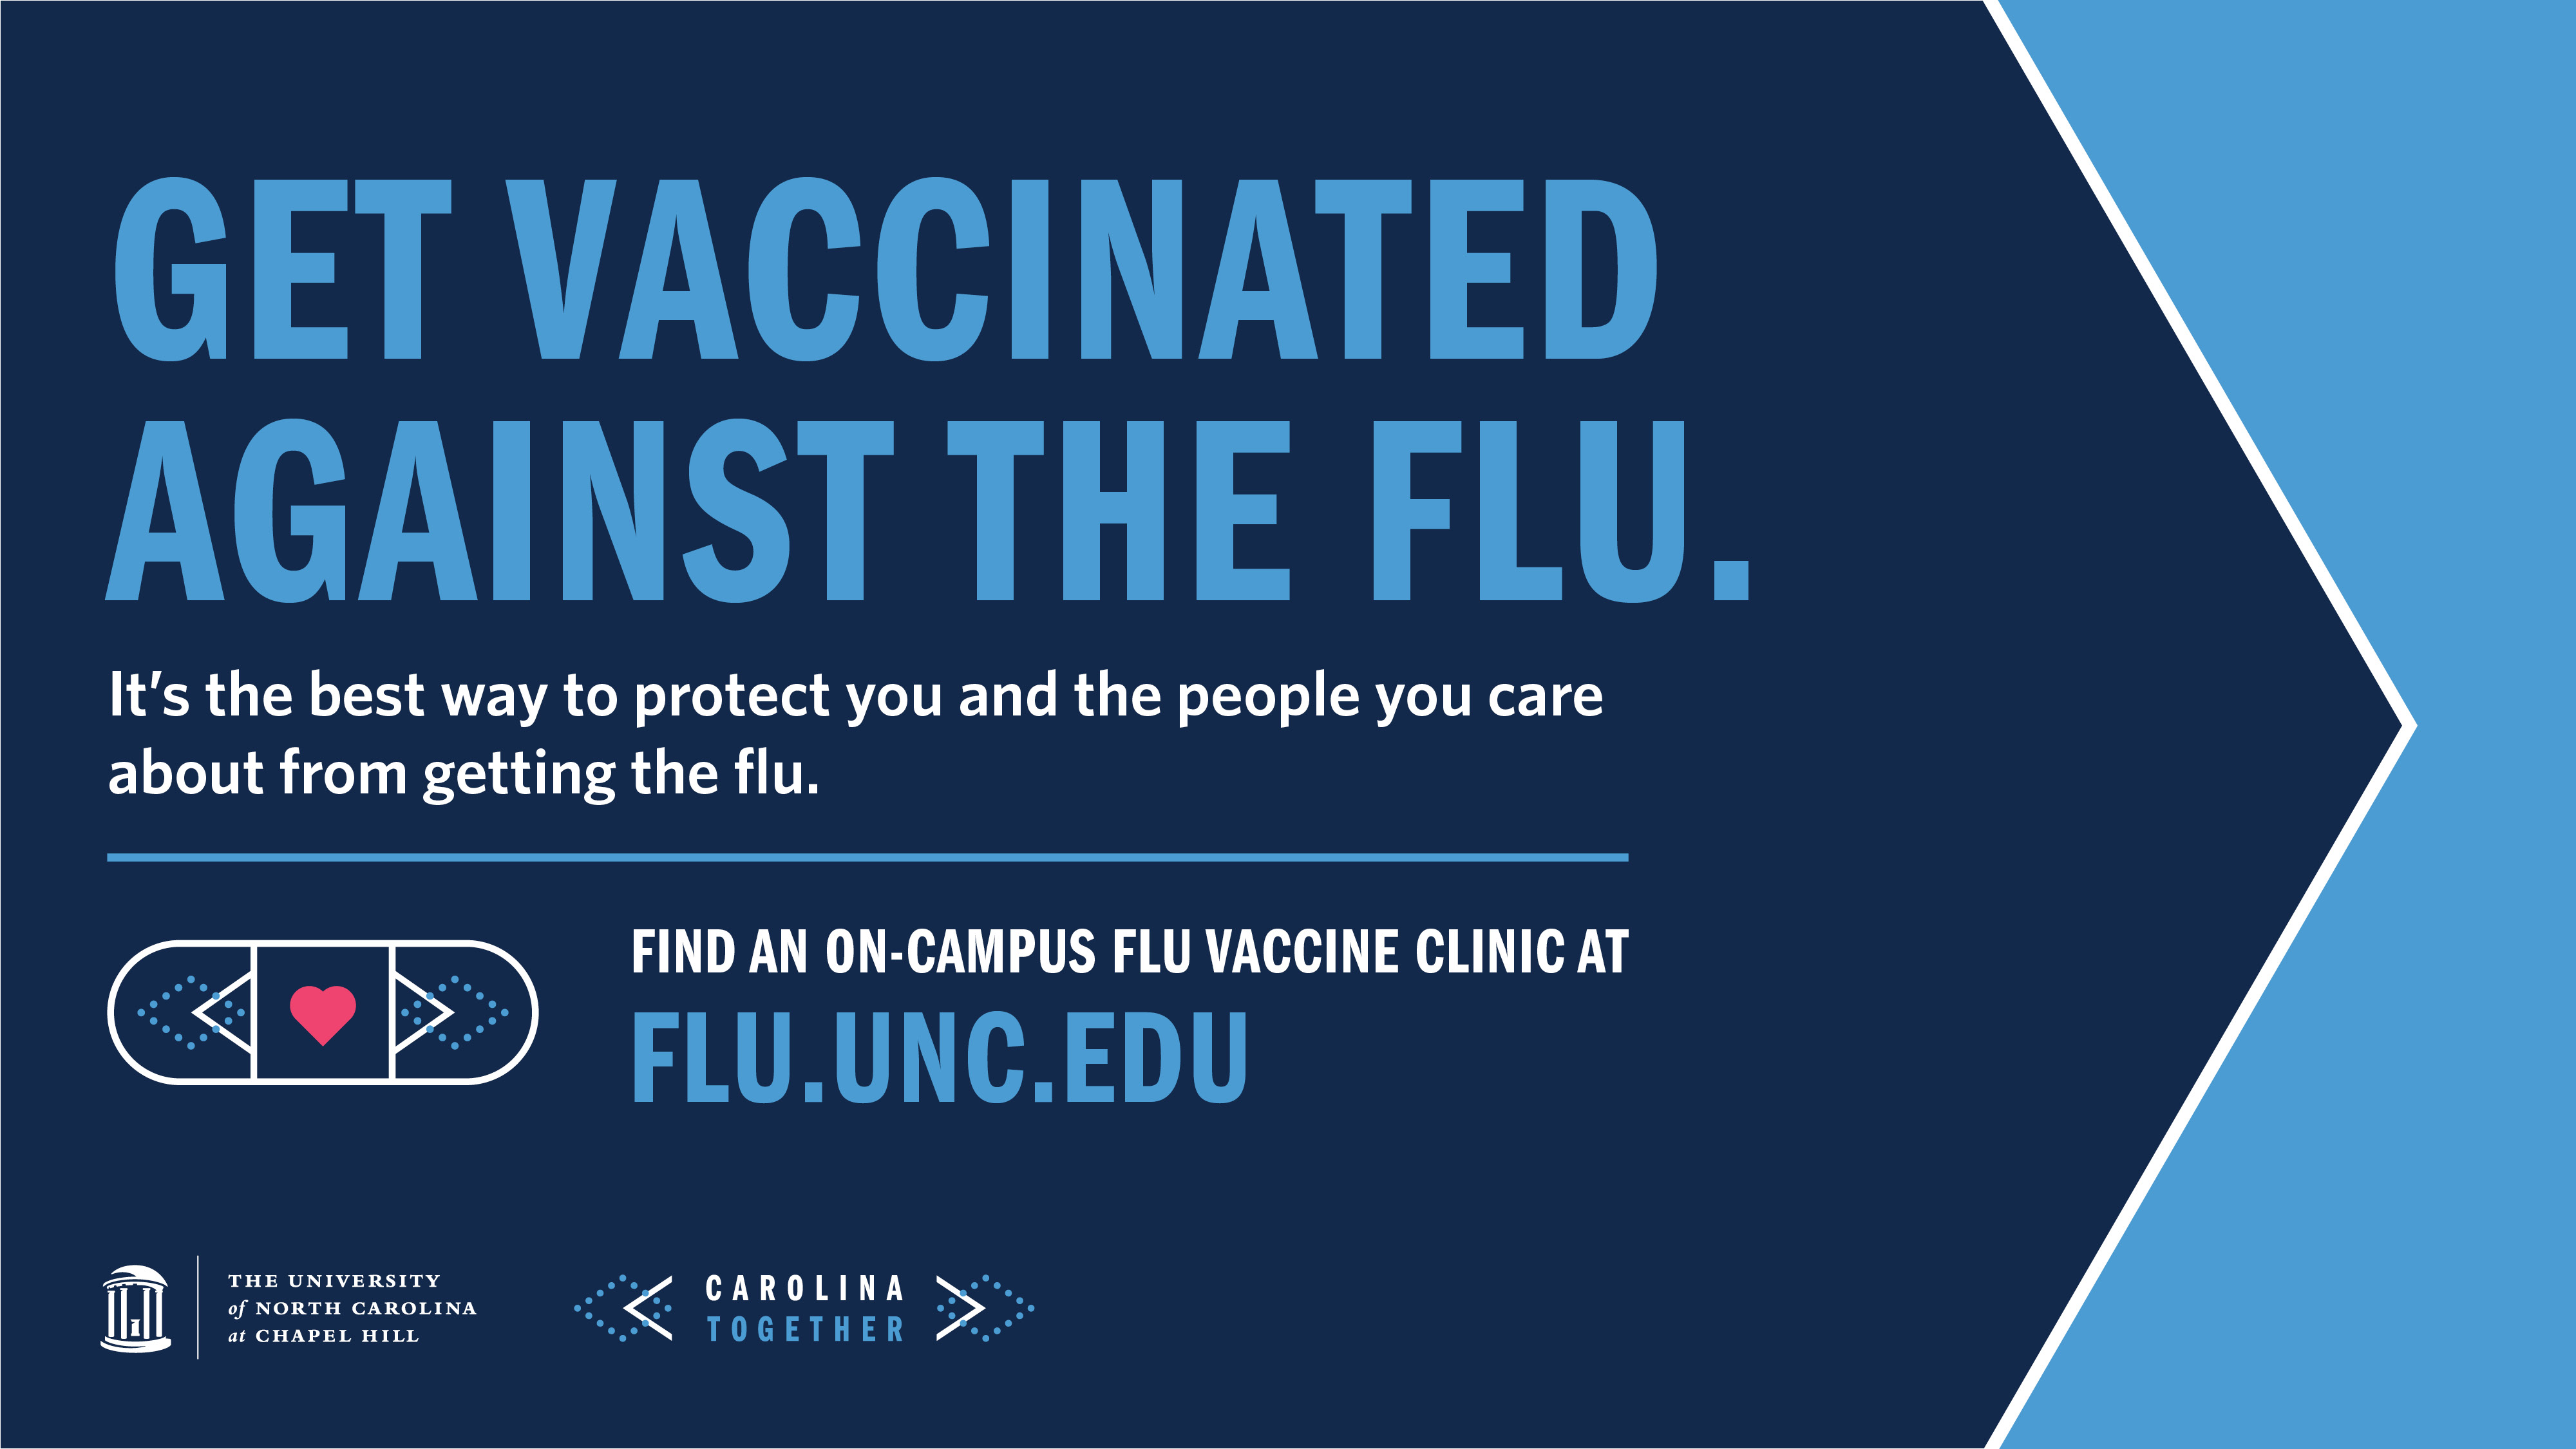 Get vaccinated against the flu